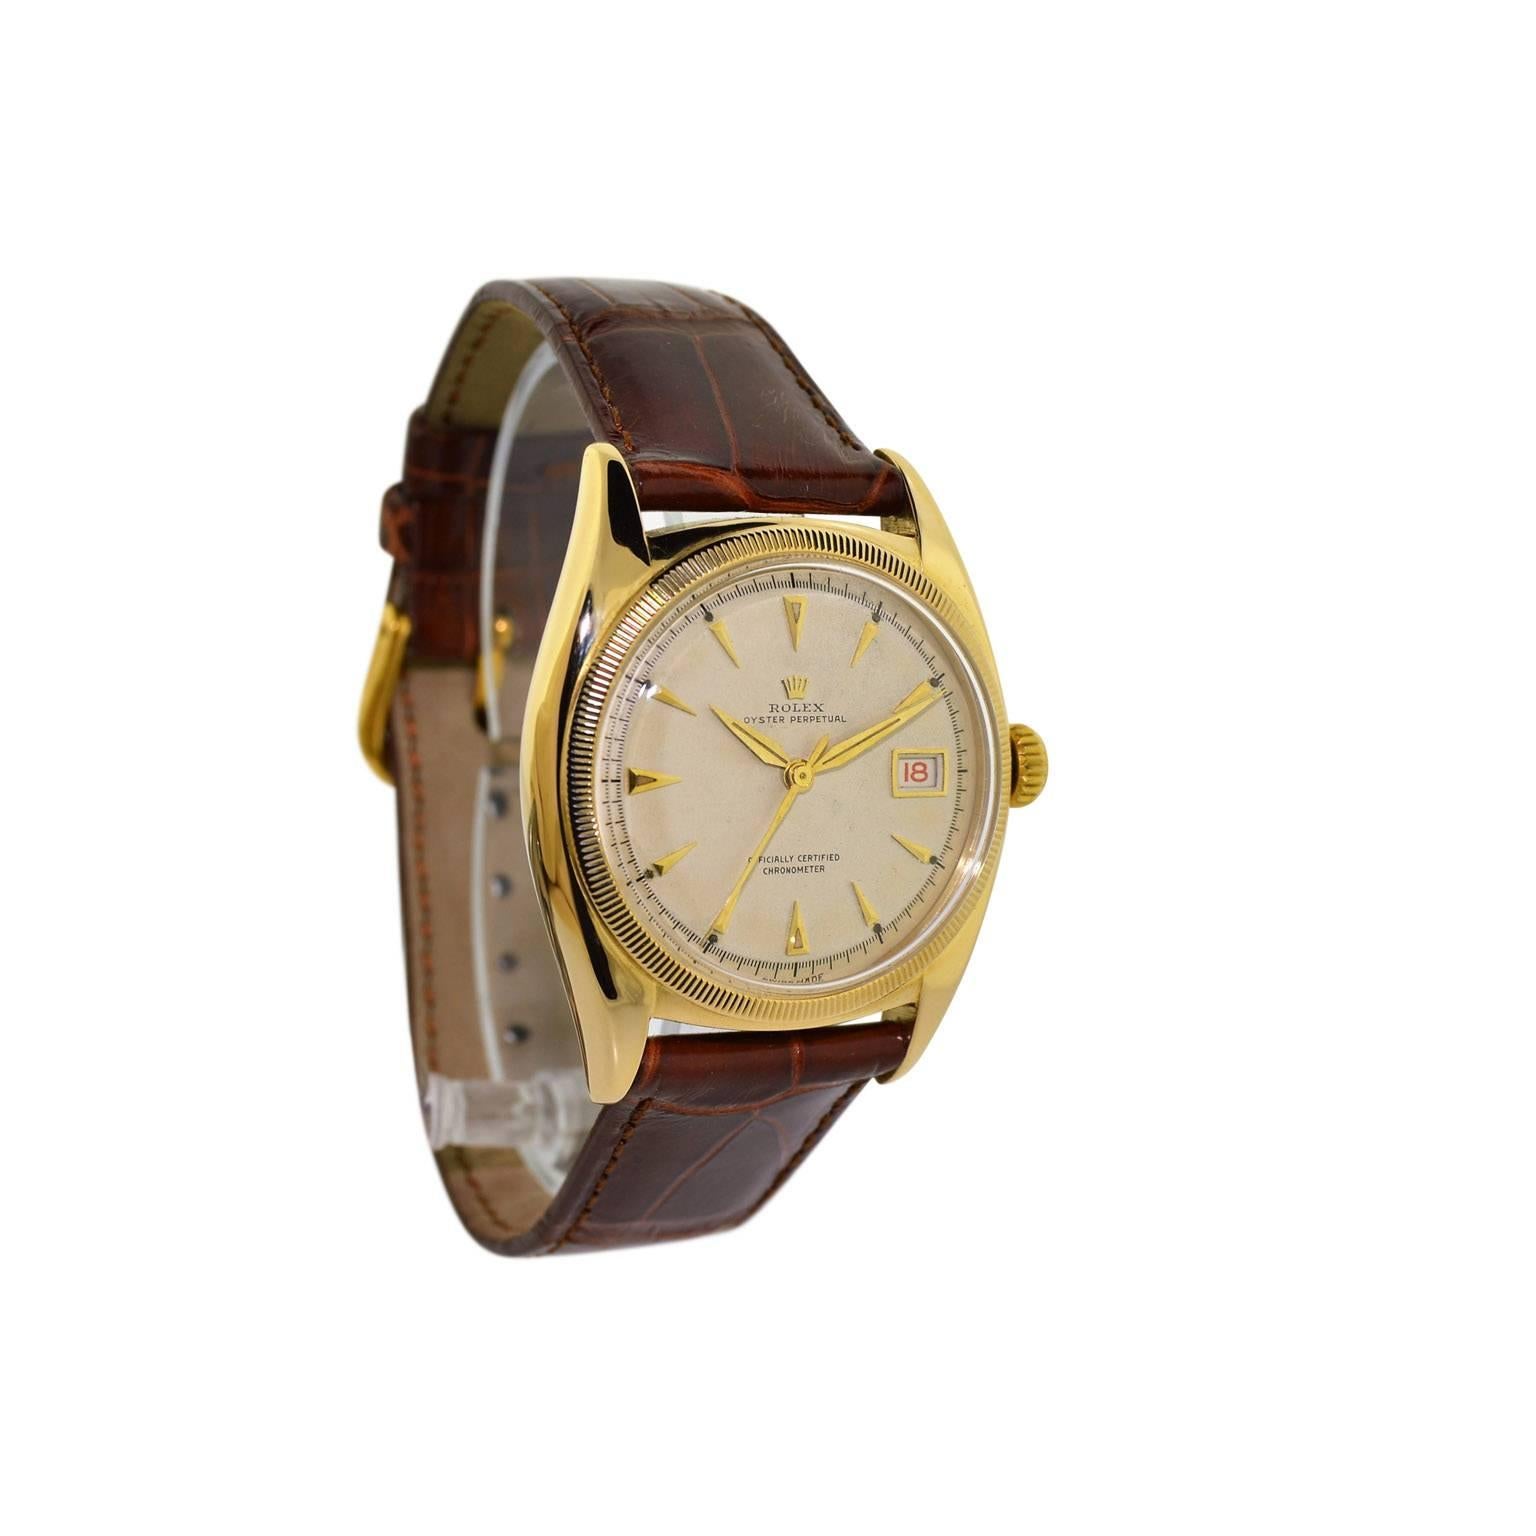 FACTORY / HOUSE: Rolex Watch Company
STYLE / REFERENCE: Ovettone / Full Size / Ref. 6075 
METAL / MATERIAL: 18Kt. Solid Yellow Gold
CIRCA: 1949 / 1950
DIMENSIONS: 44mm X 36mm
MOVEMENT / CALIBER: Perpetual Winding / 18 Jewels / Ref. 745 Full Size